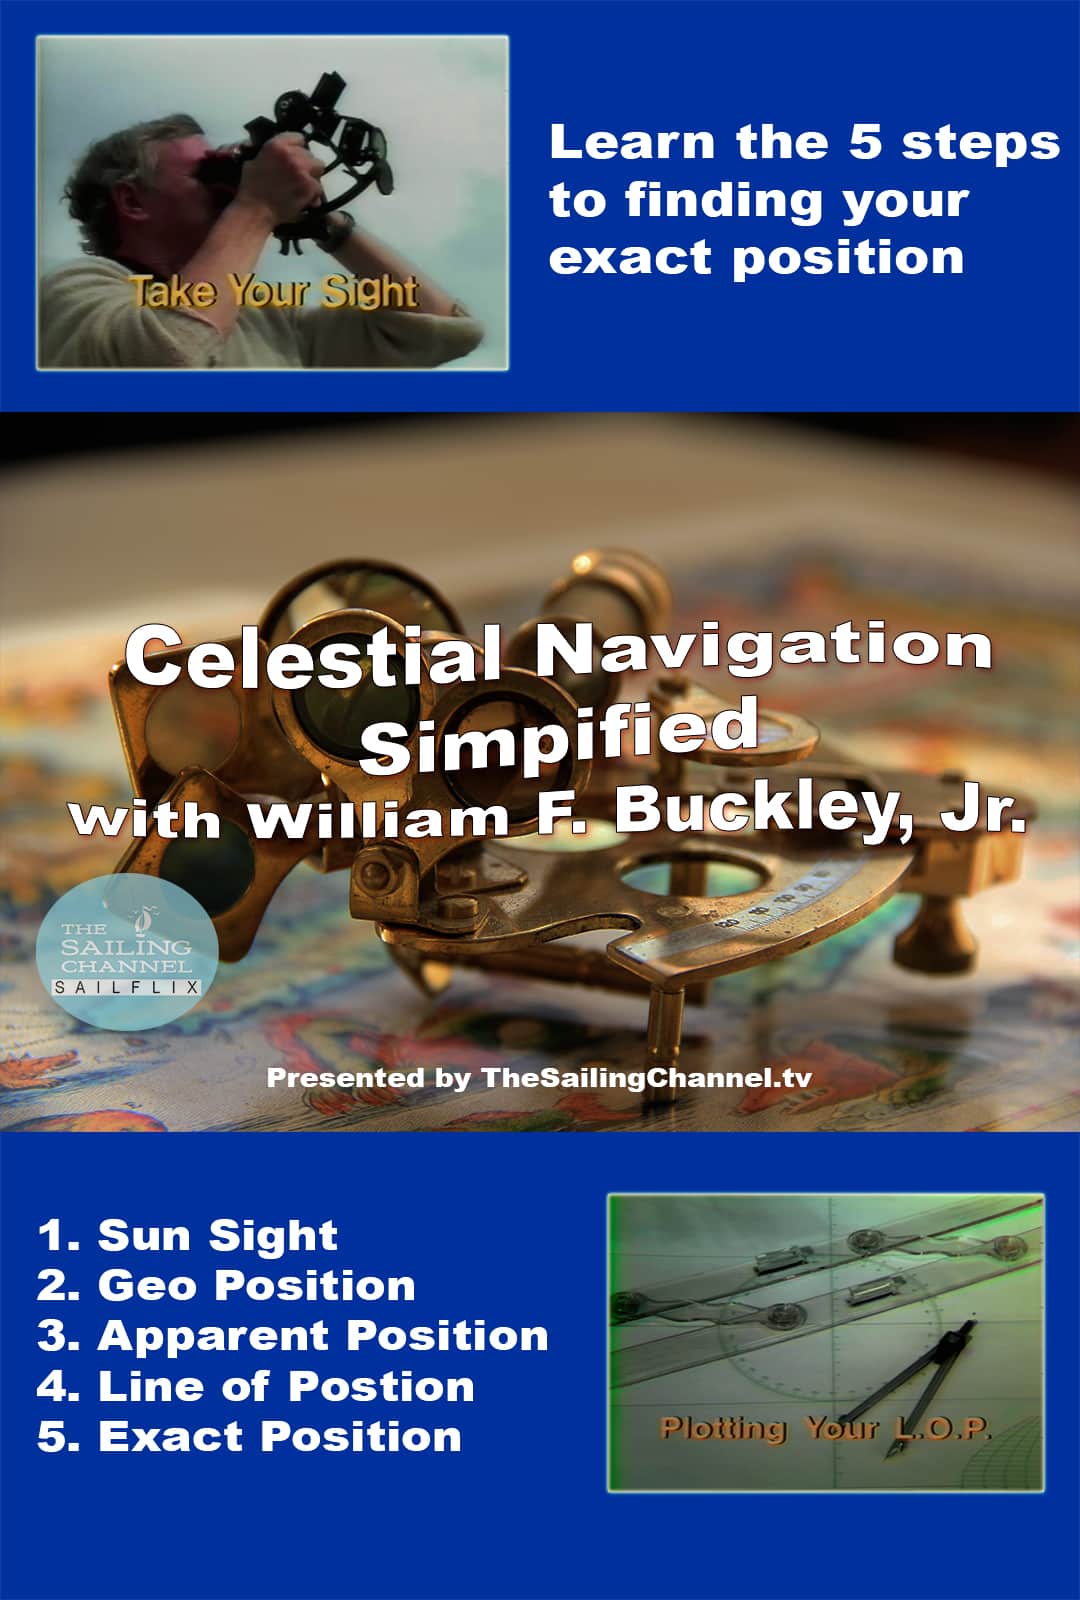 Celestial Navigation Simplified with William F. Buckley, Jr. VOD